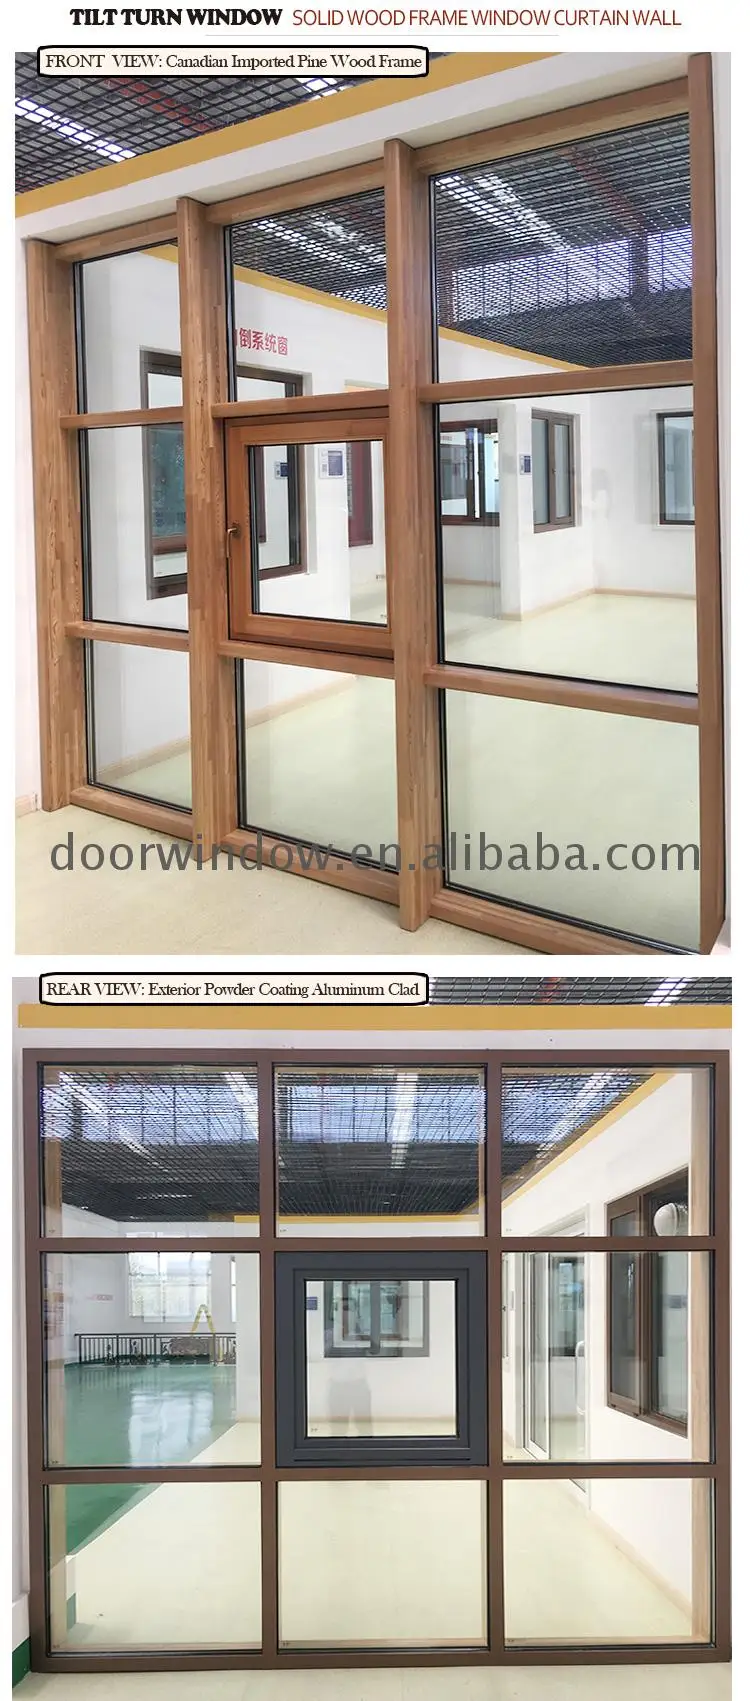 New York curtain wall for sales